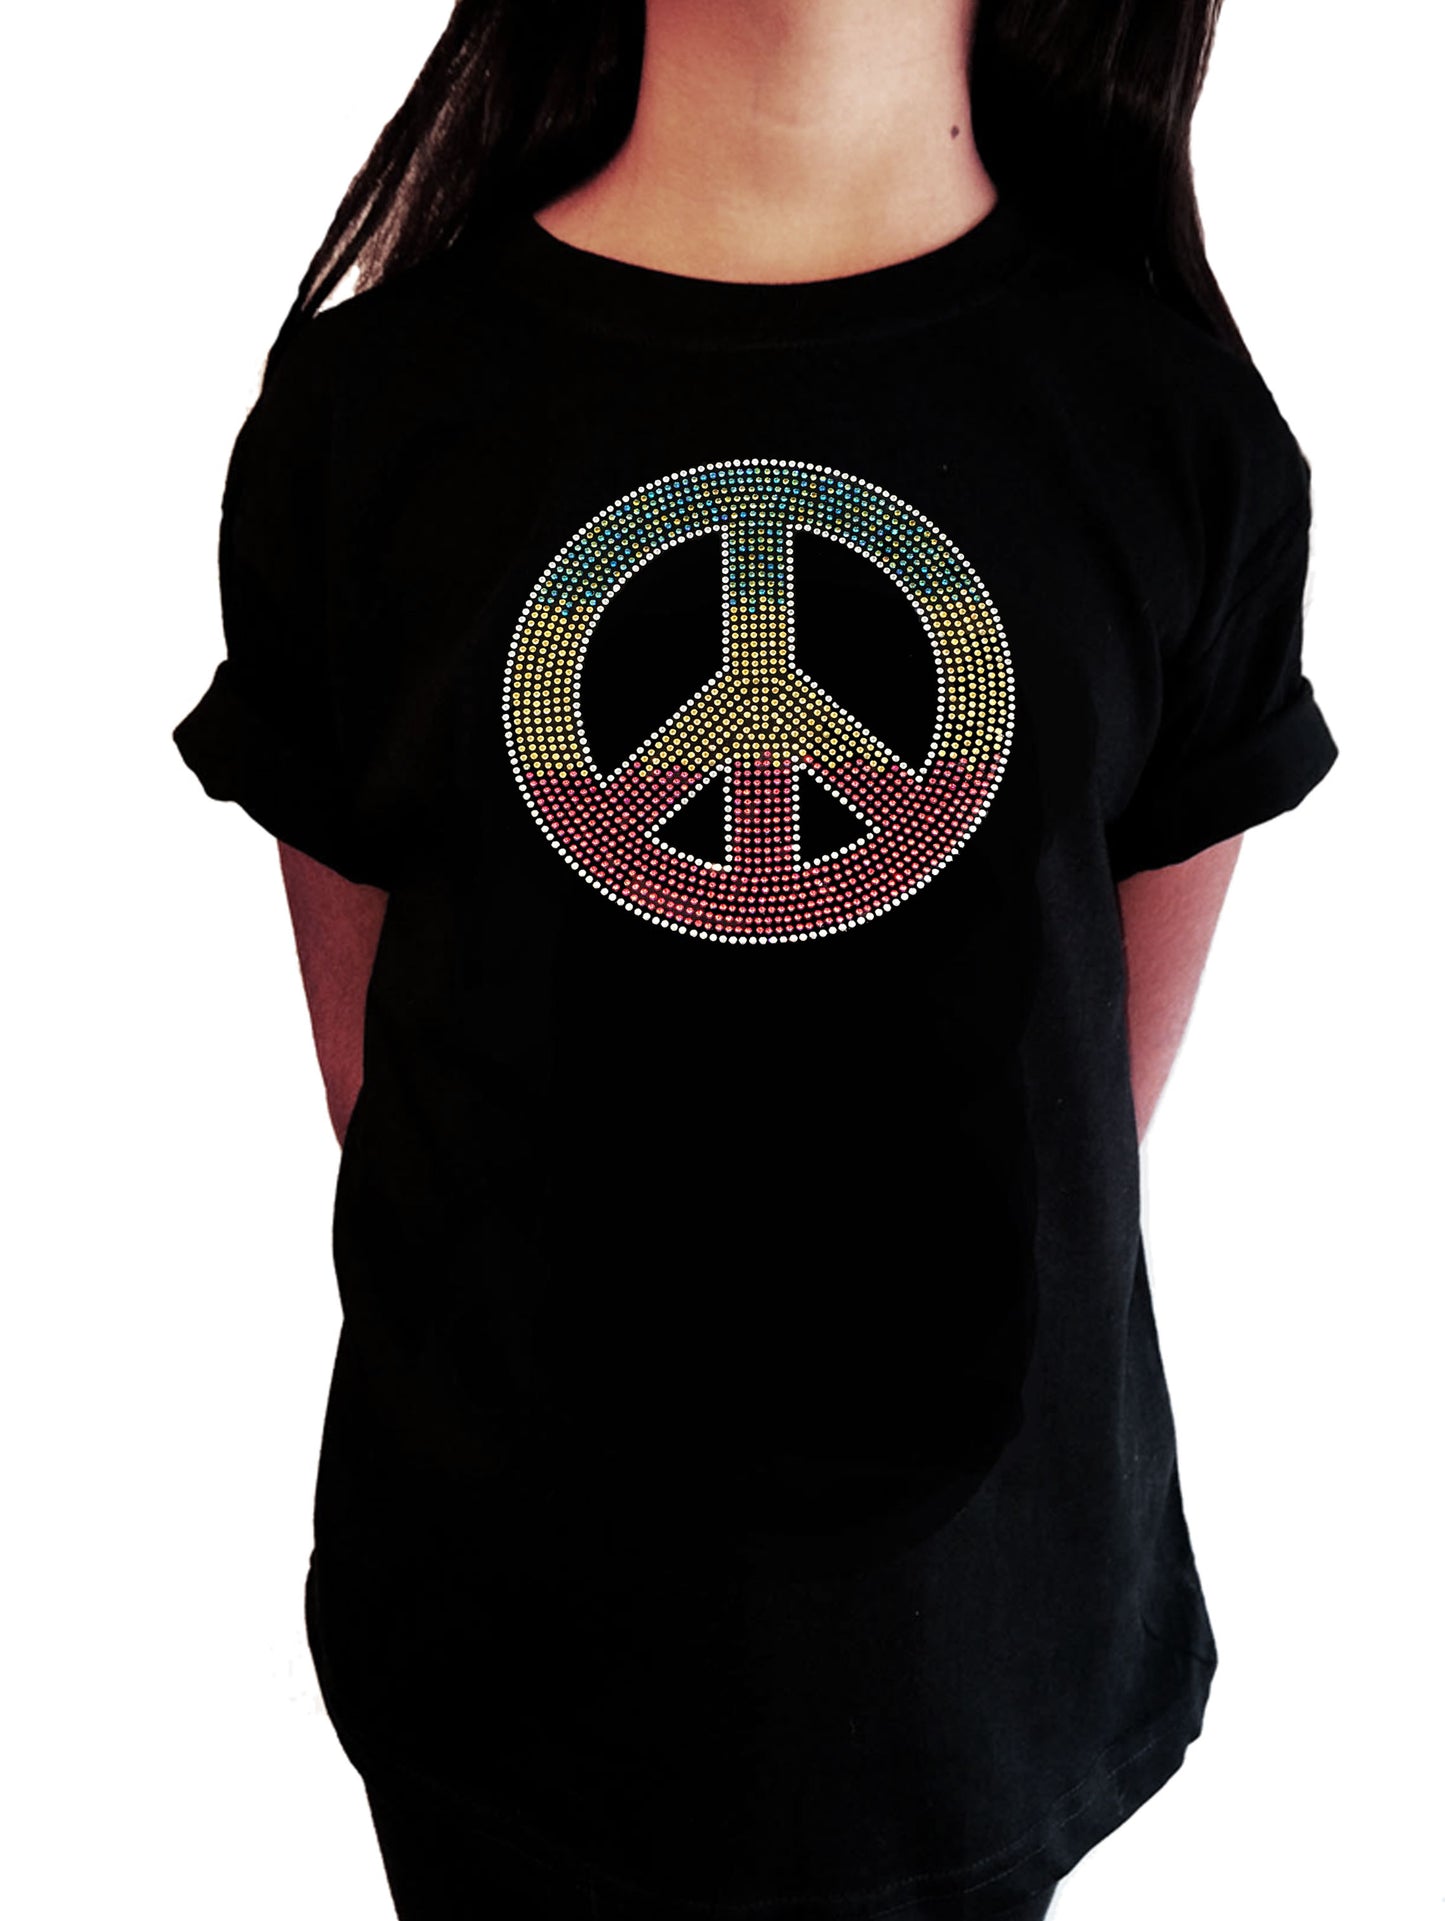 Girls Rhinestone T-Shirt " Colorful Peace Sign in Rhinestones " Kids Size 3 to 14 Available